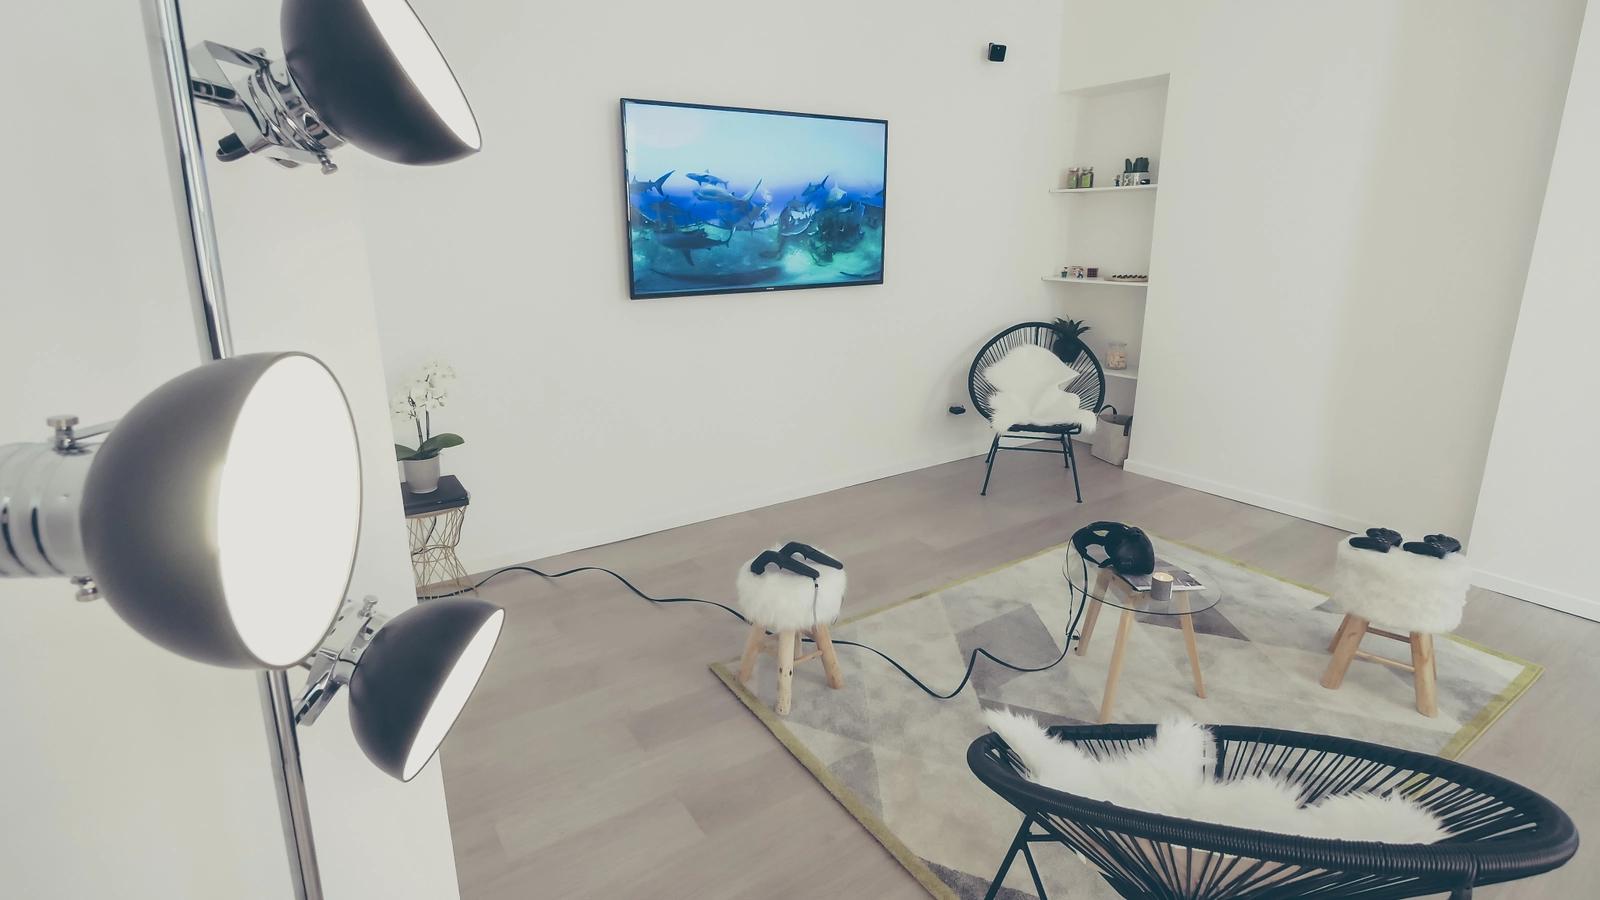 The Game Room of the connected apartment